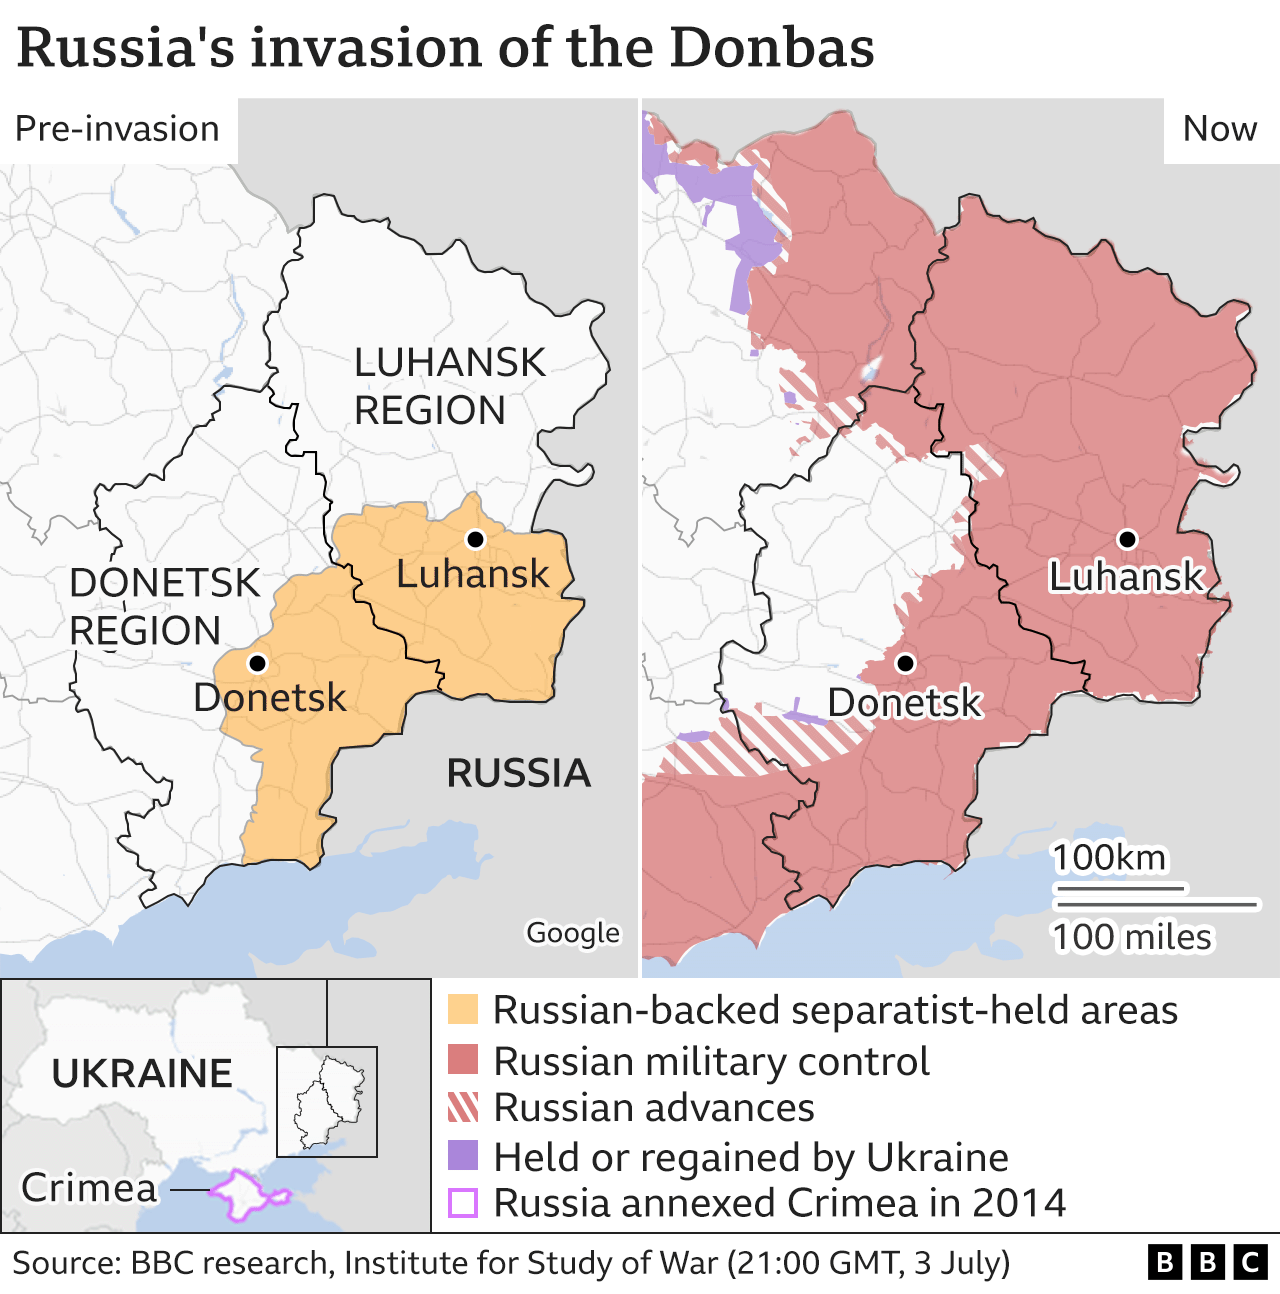 Map showing Donbas region before and after invasion, updated 4 July